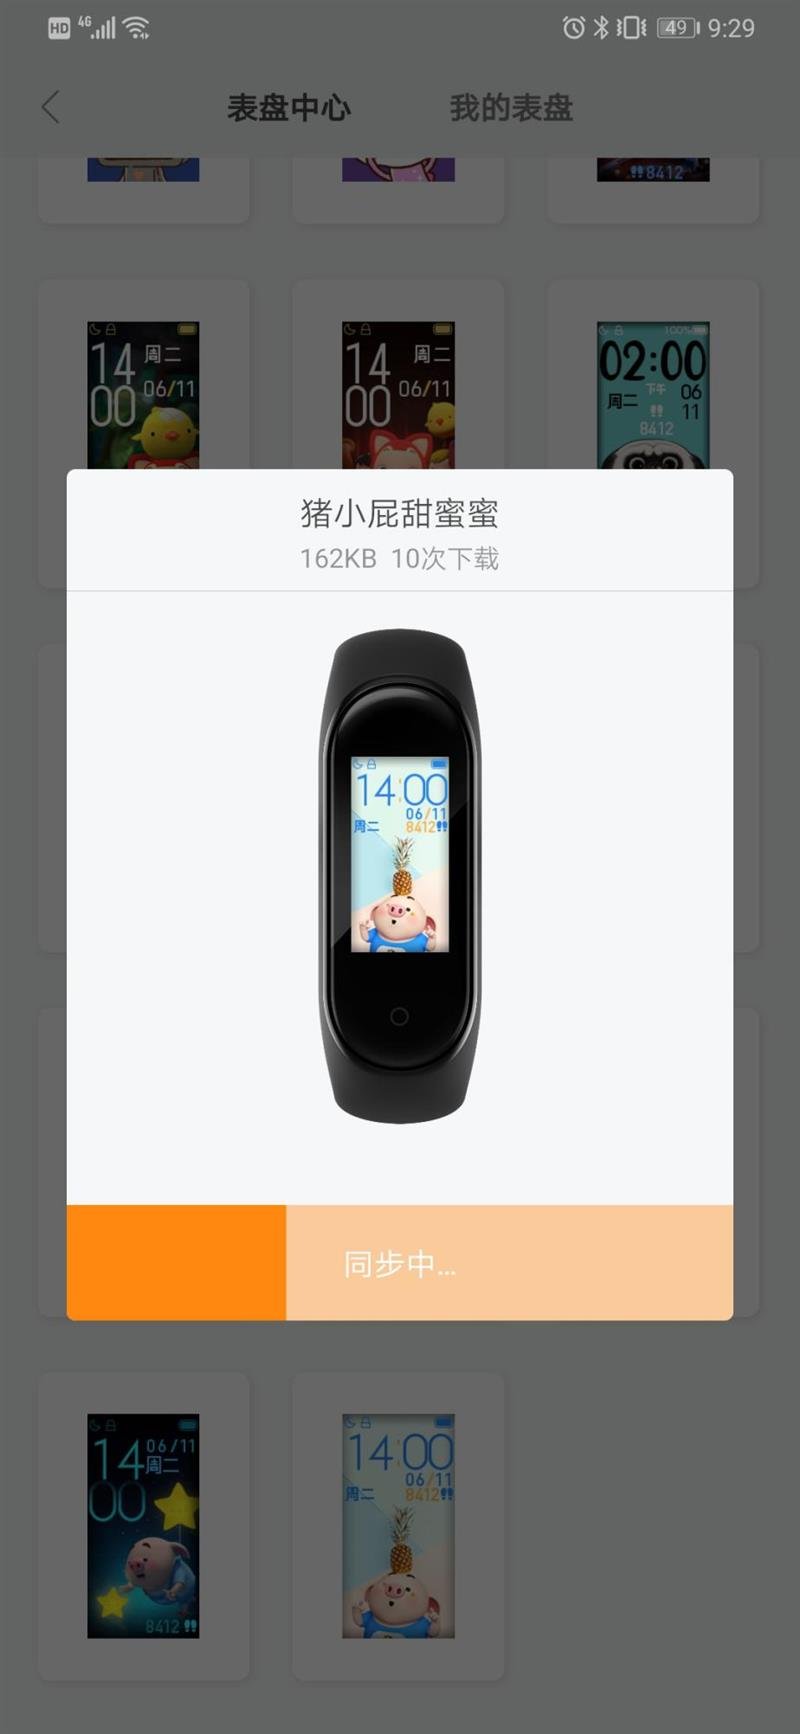 Xiaomi Mi Band 4 In Pictures: A Look At The New Design And Features -  Gizmochina